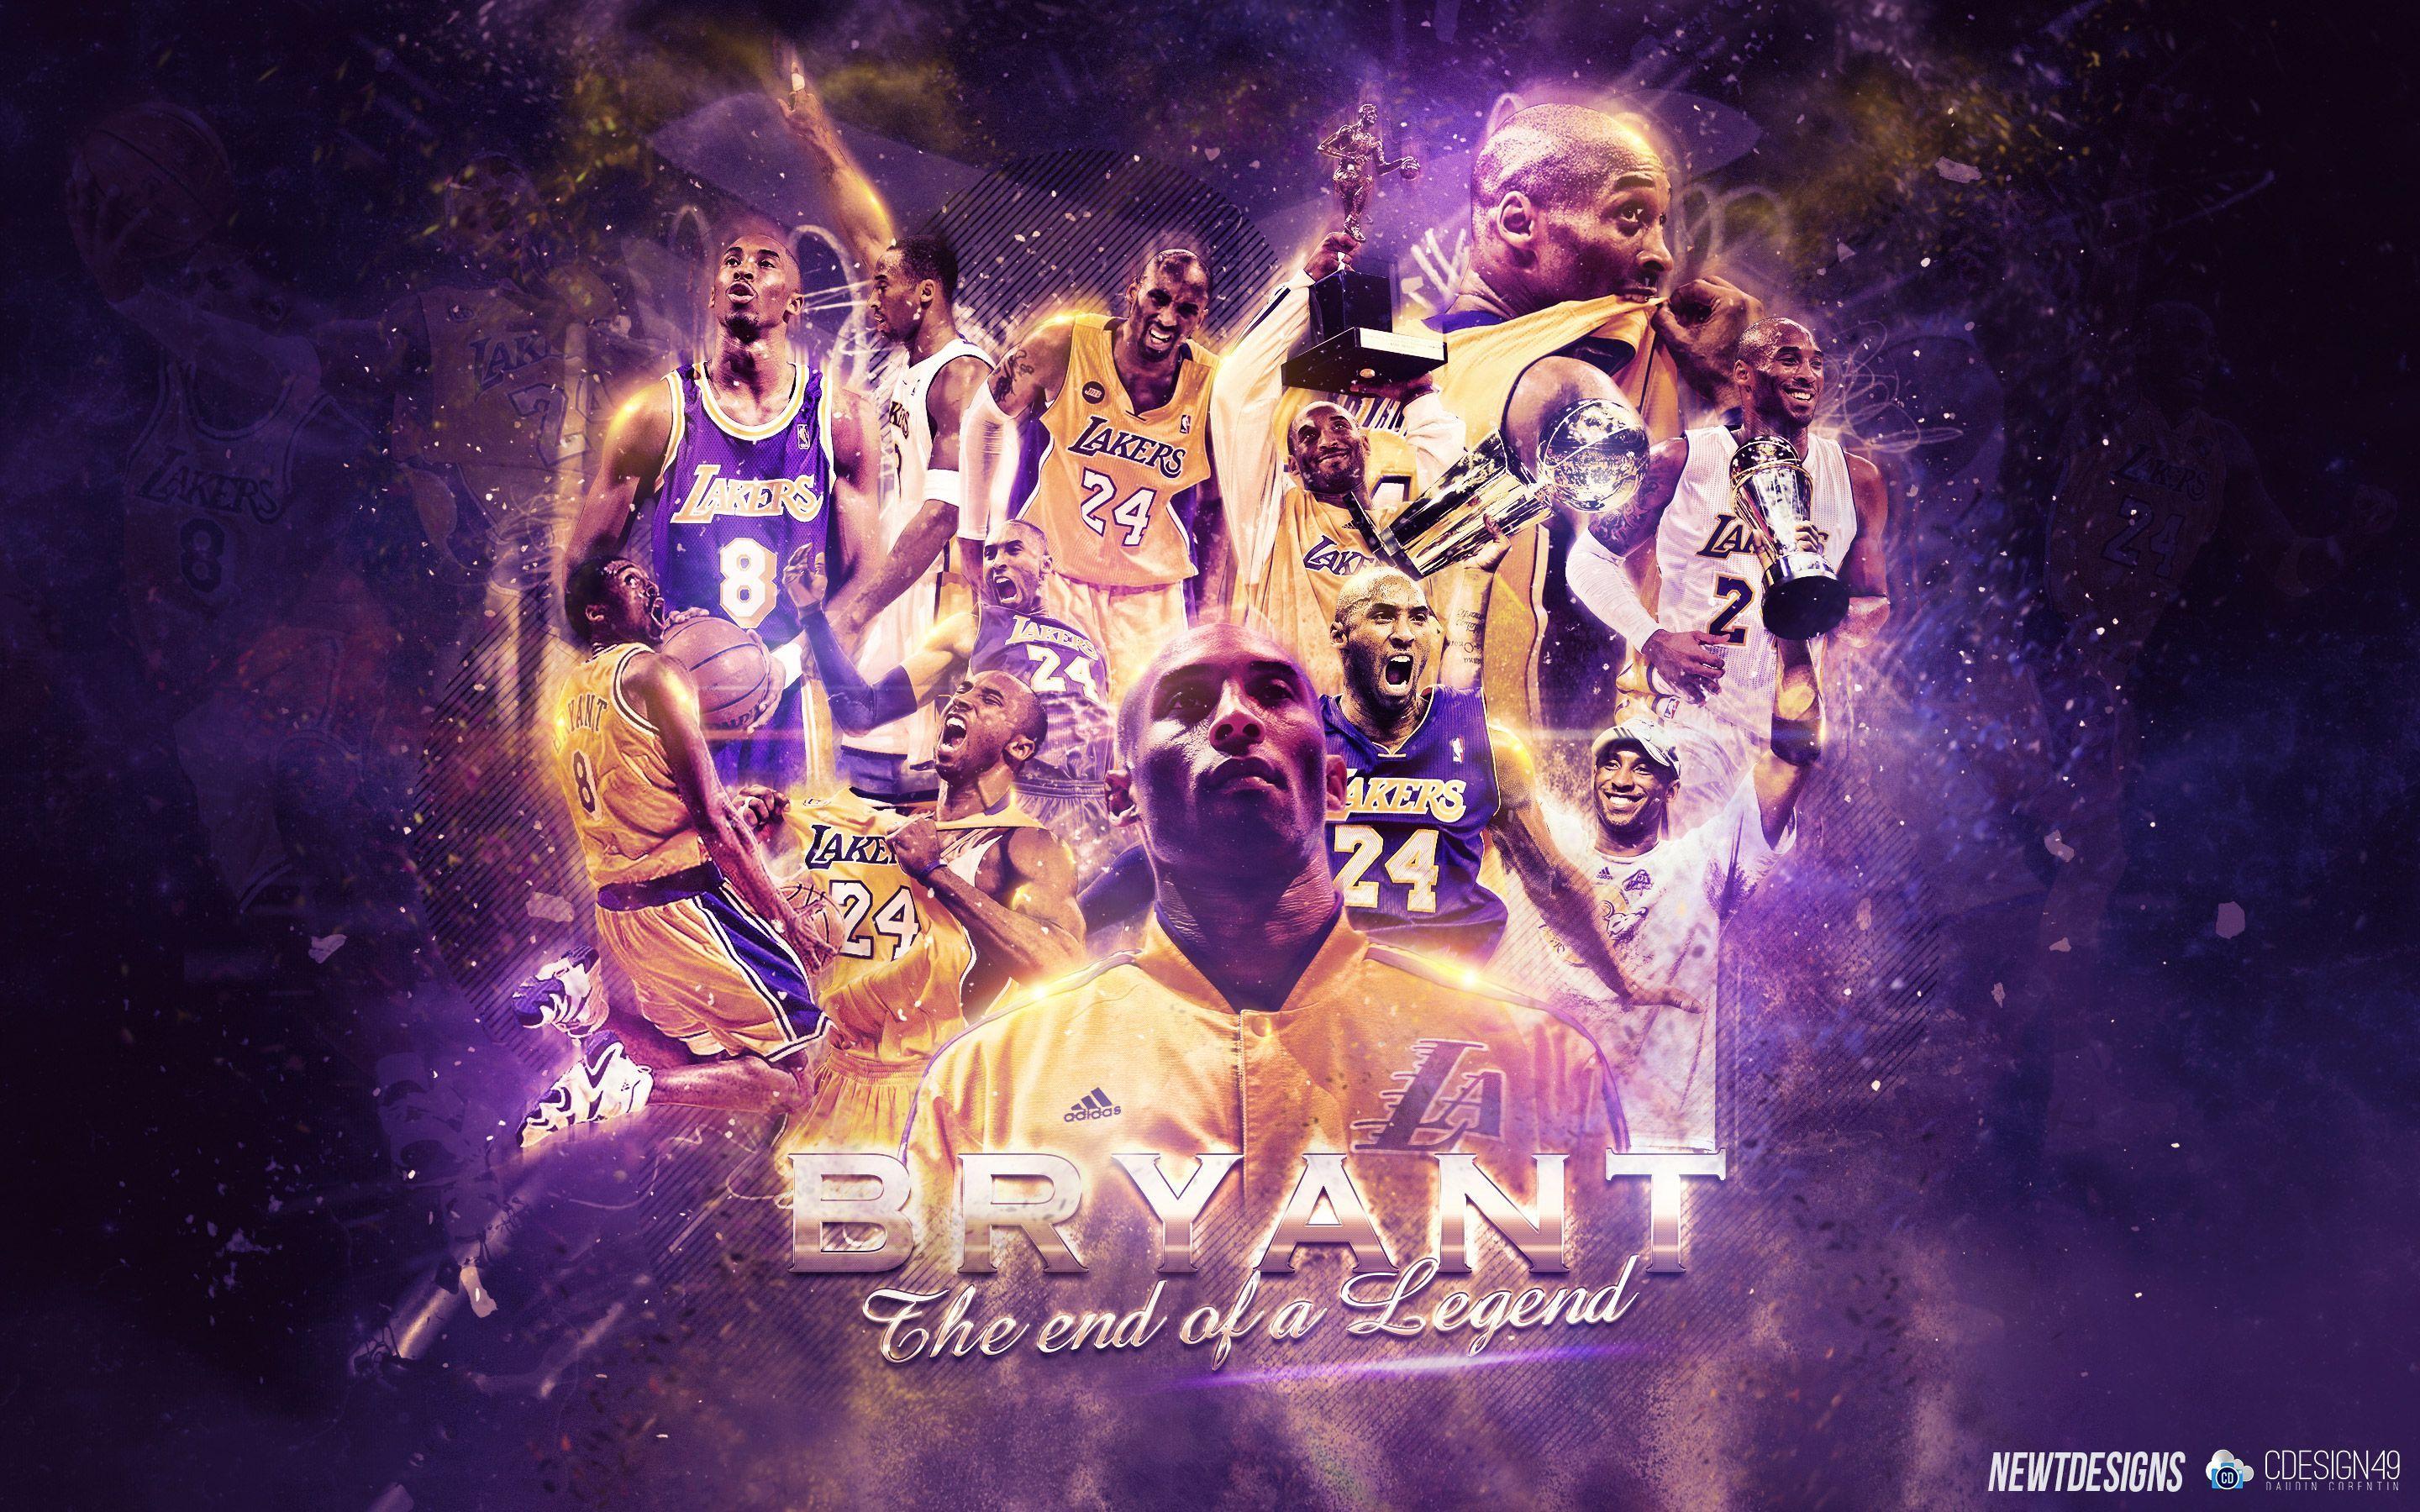 Kobe Bryant The End of a Legend Wallpaper. Basketball Wallpaper at